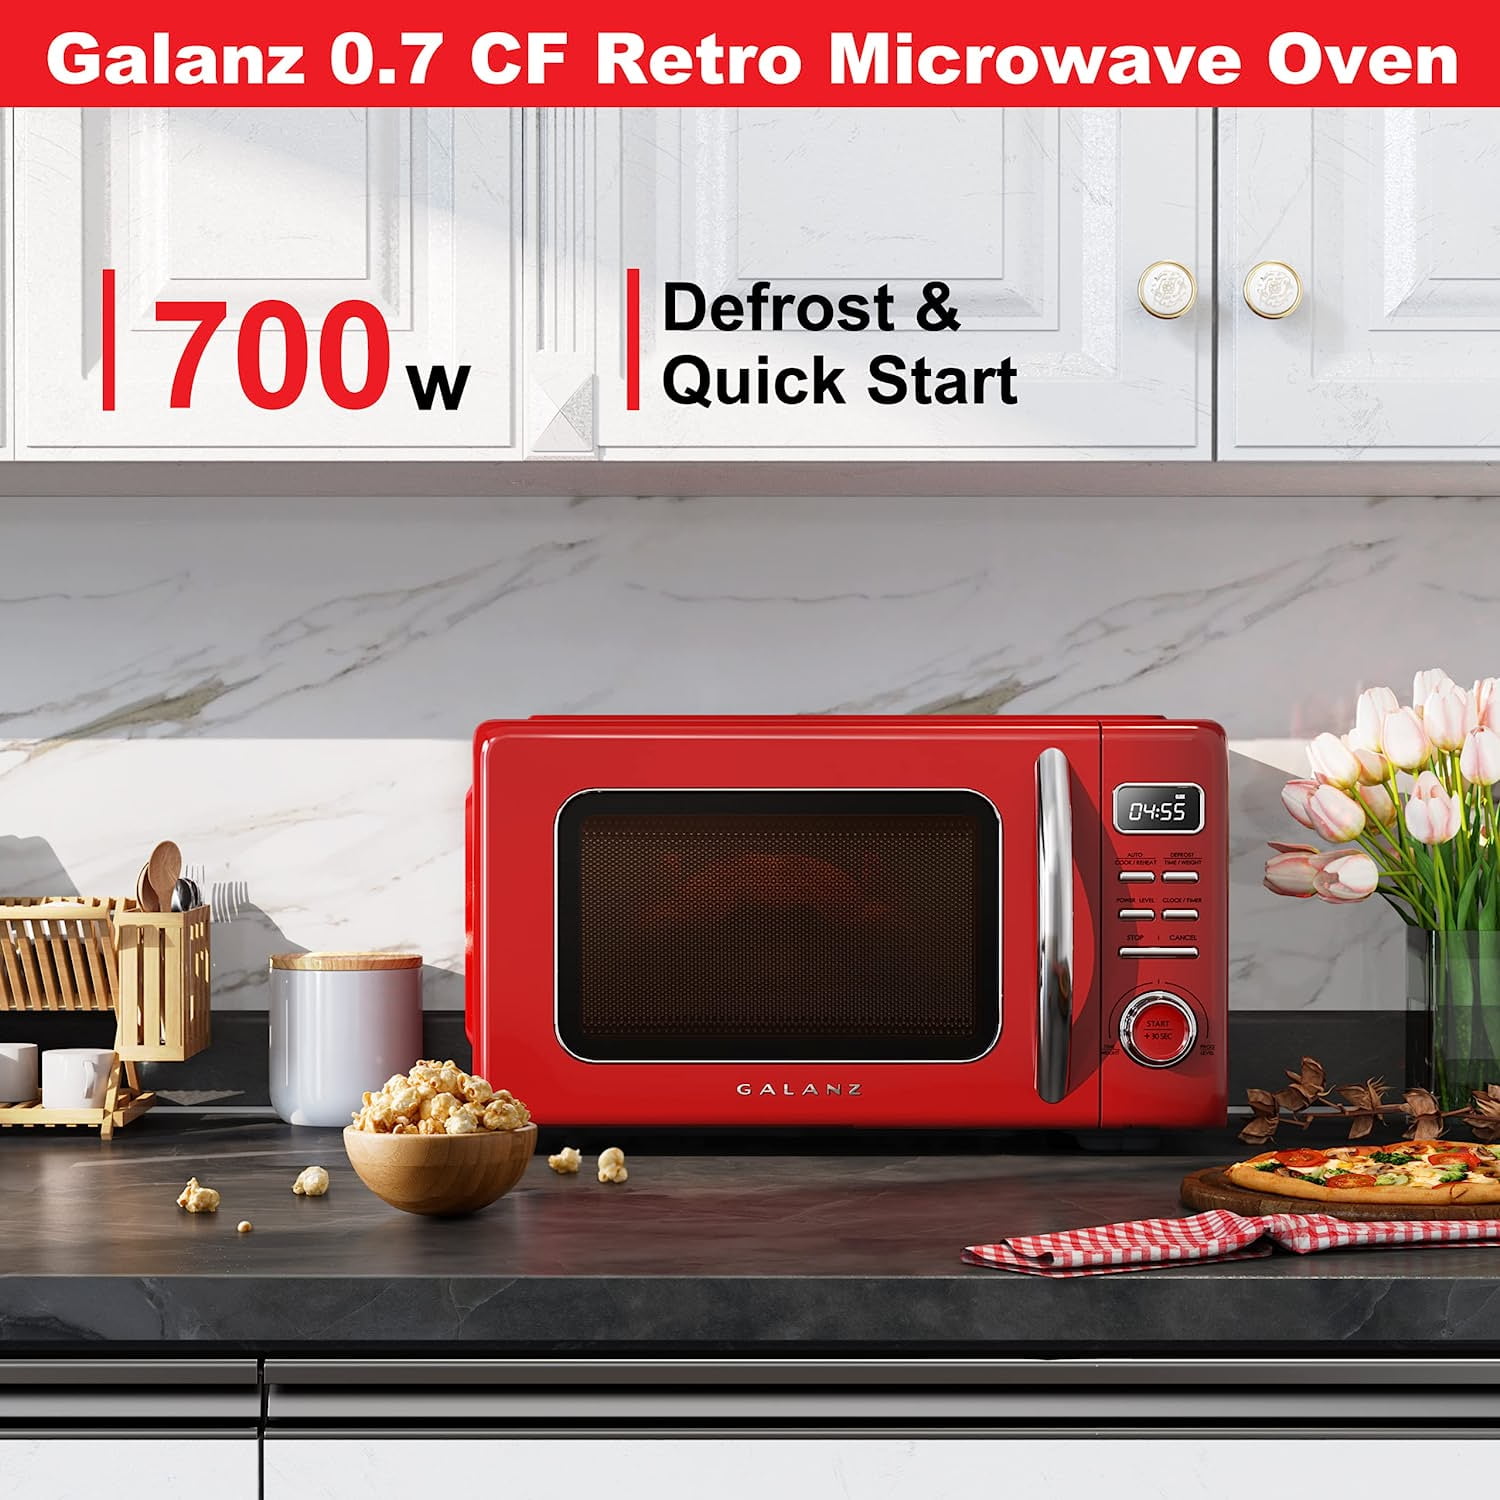 Galanz GLCMKZ07GNR07 galanz gLcMKZ07gNR07 Retro countertop Microwave Oven  with Auto cook & Reheat, Defrost, Quick Start Functions, Easy clean with gl